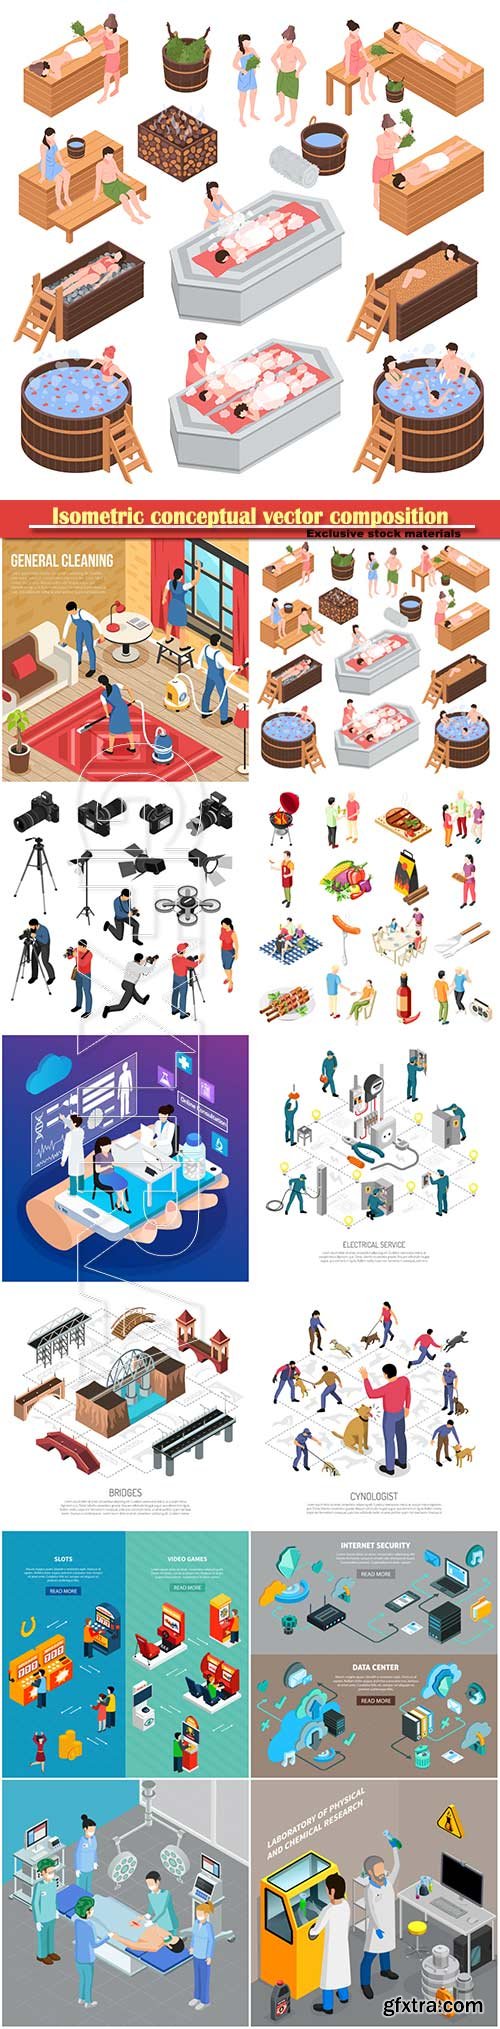 Isometric conceptual vector composition, infographics template # 54